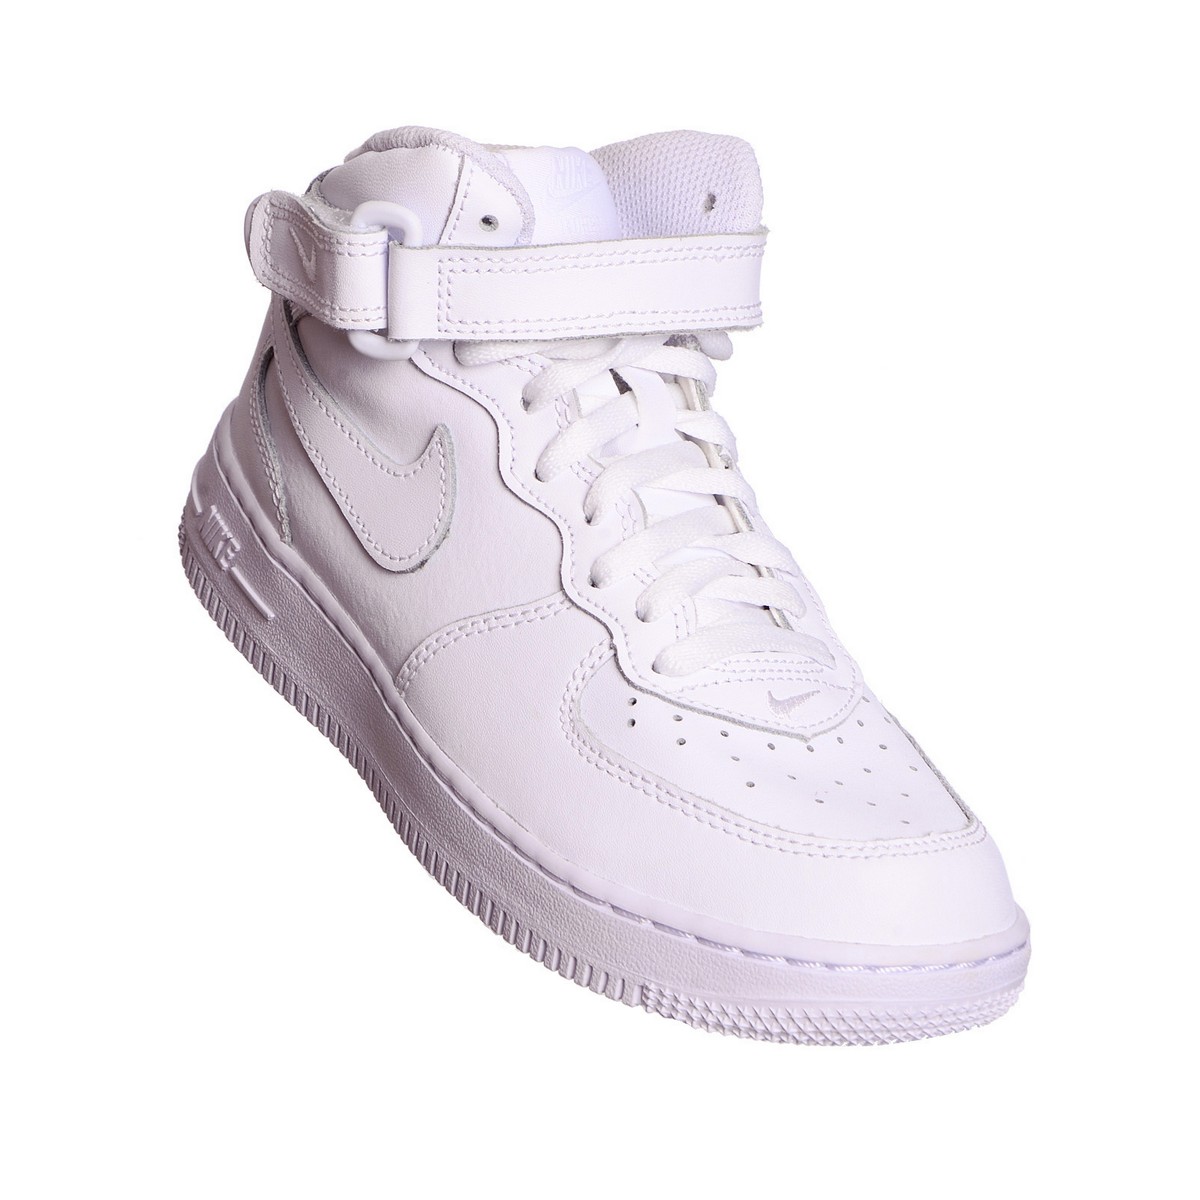 Nike FORCE 1 MID (PS) 